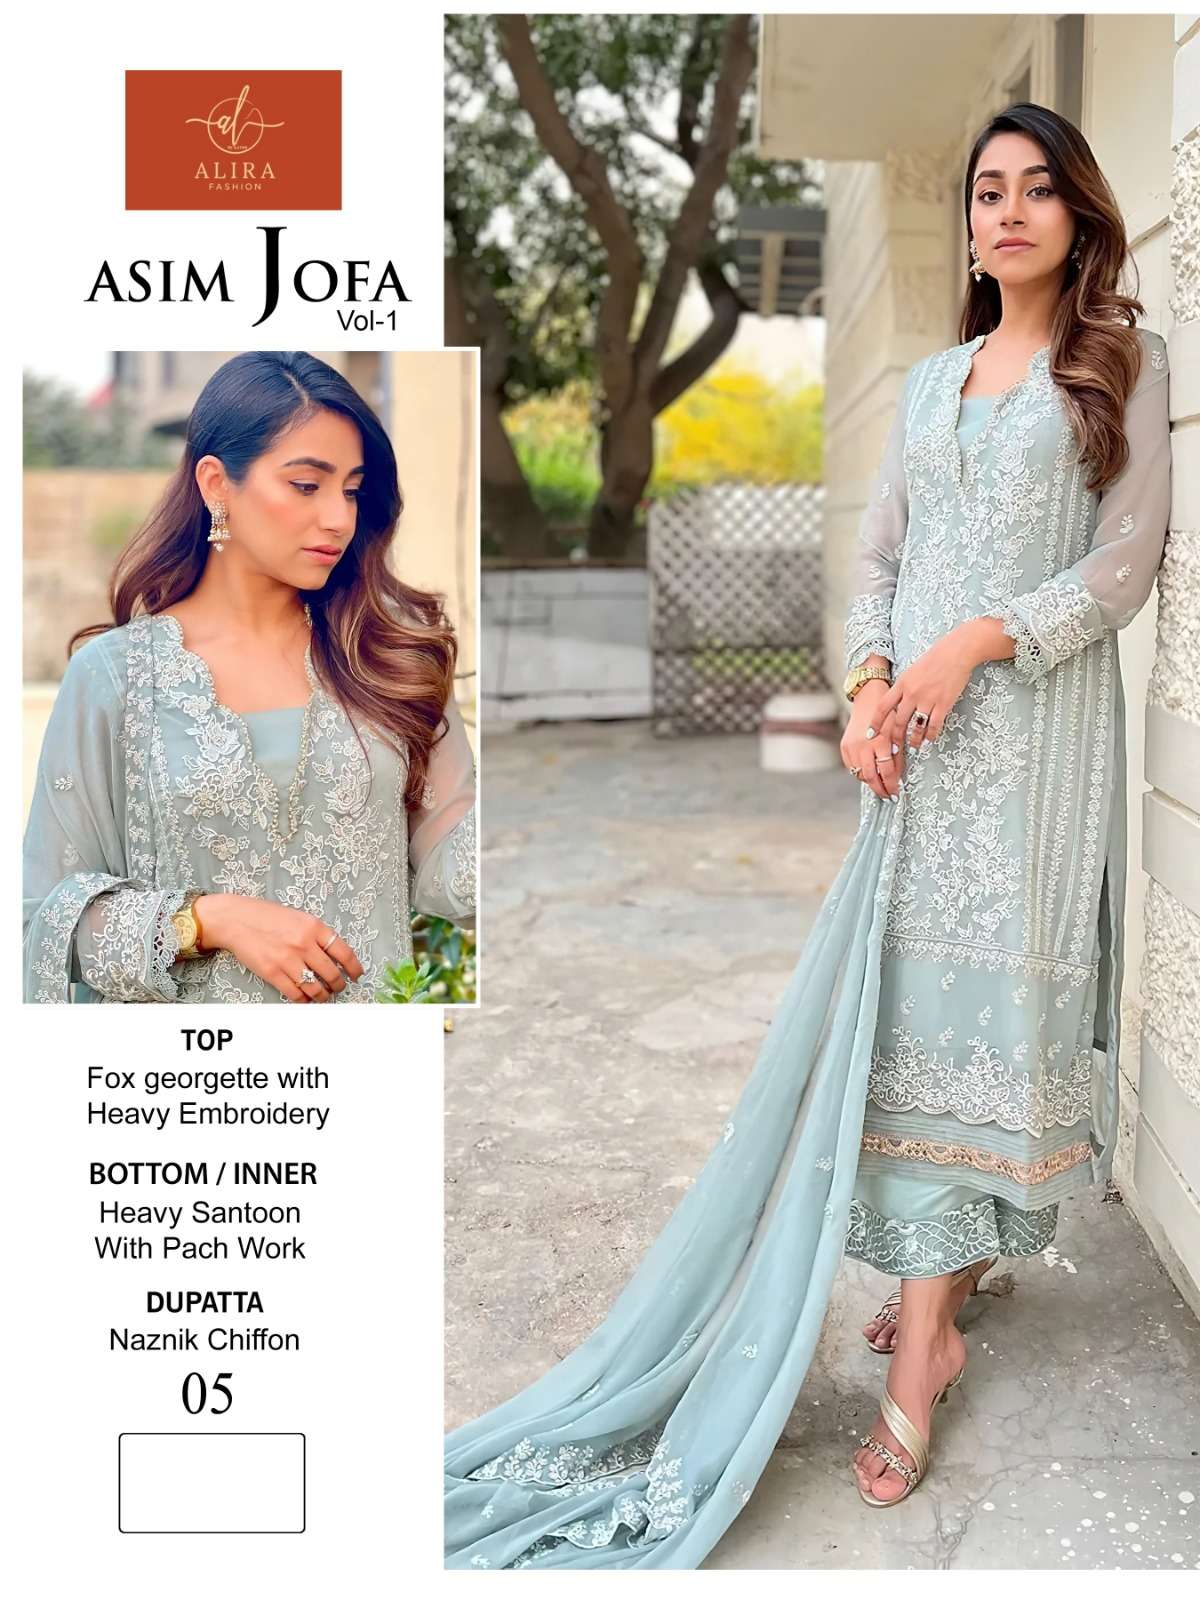 Asim Jofa Vol-1 By Alira 04 To 06 Series Beautiful Pakistani Suits Colorful Stylish Fancy Casual Wear & Ethnic Wear Faux Georgette Embroidered Dresses At Wholesale Price